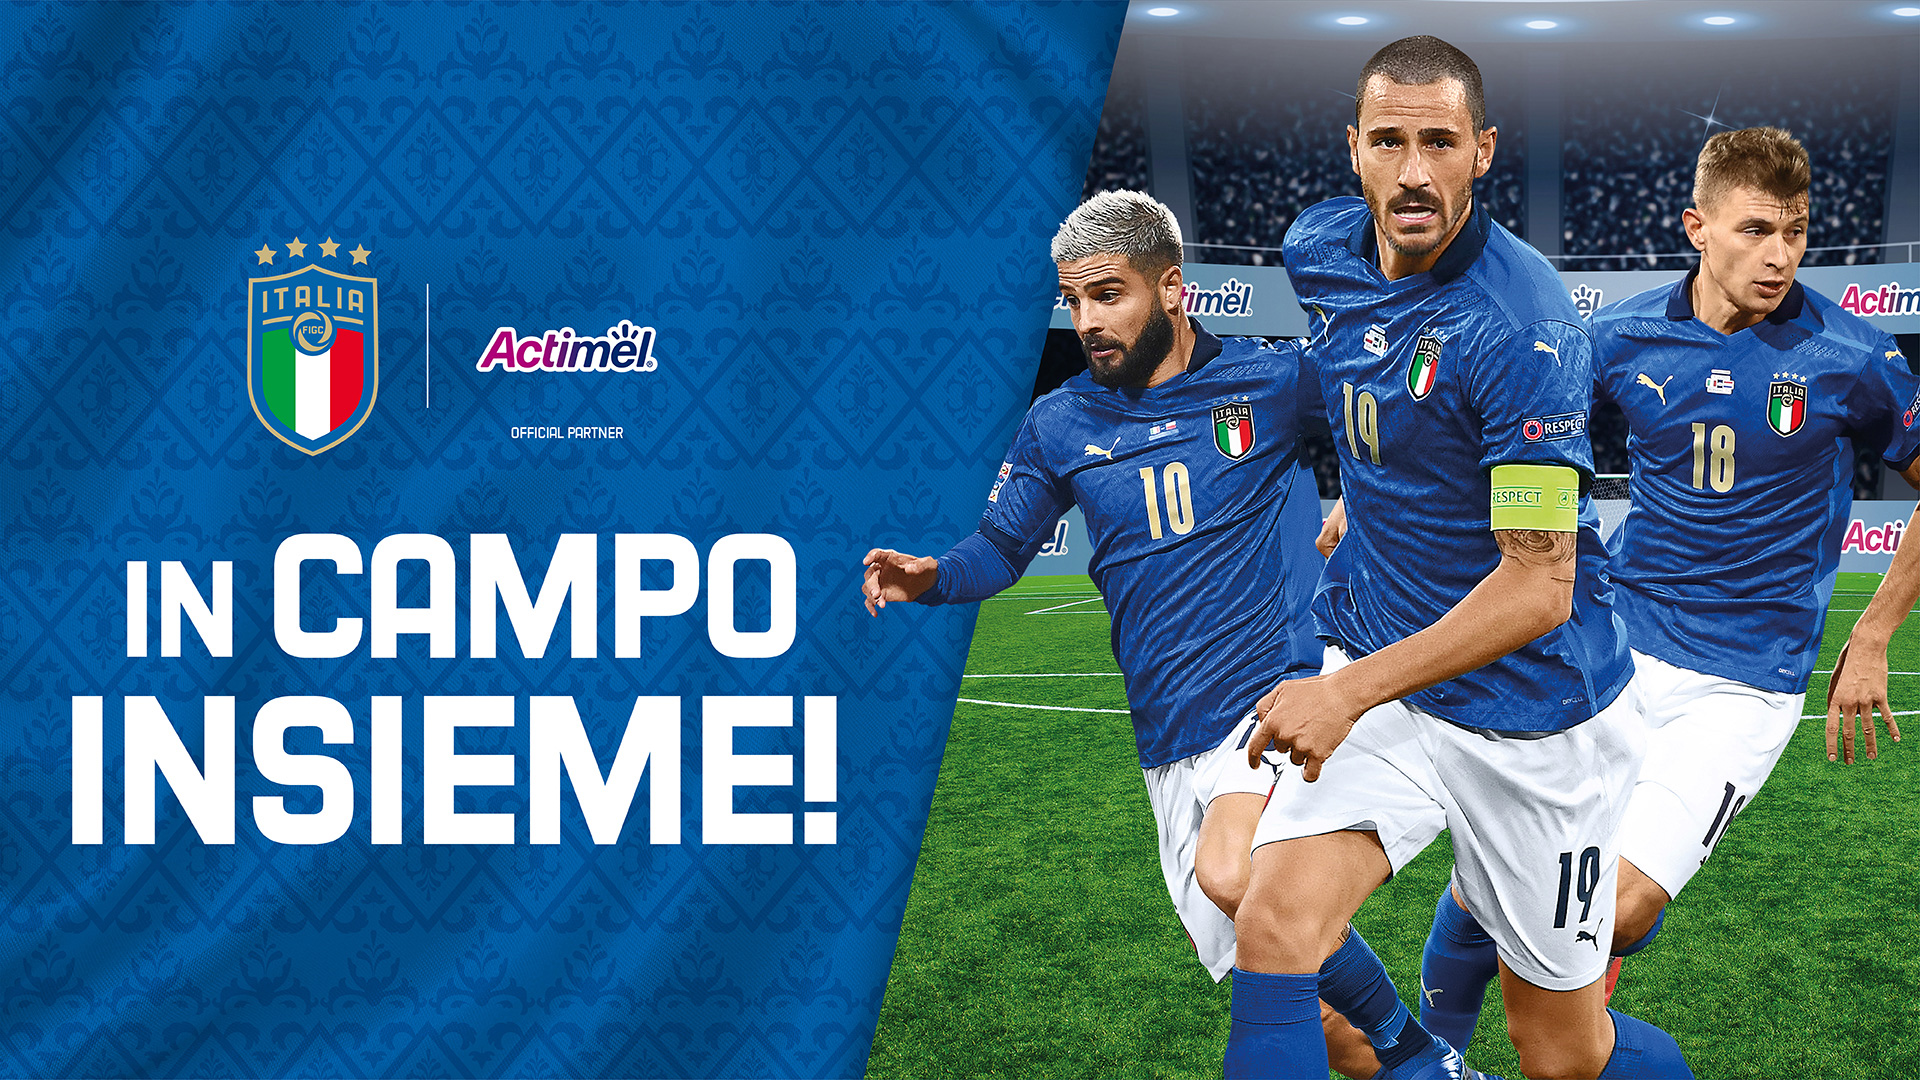 ACTIMEL, DANETTE and FIGC: a winning team!